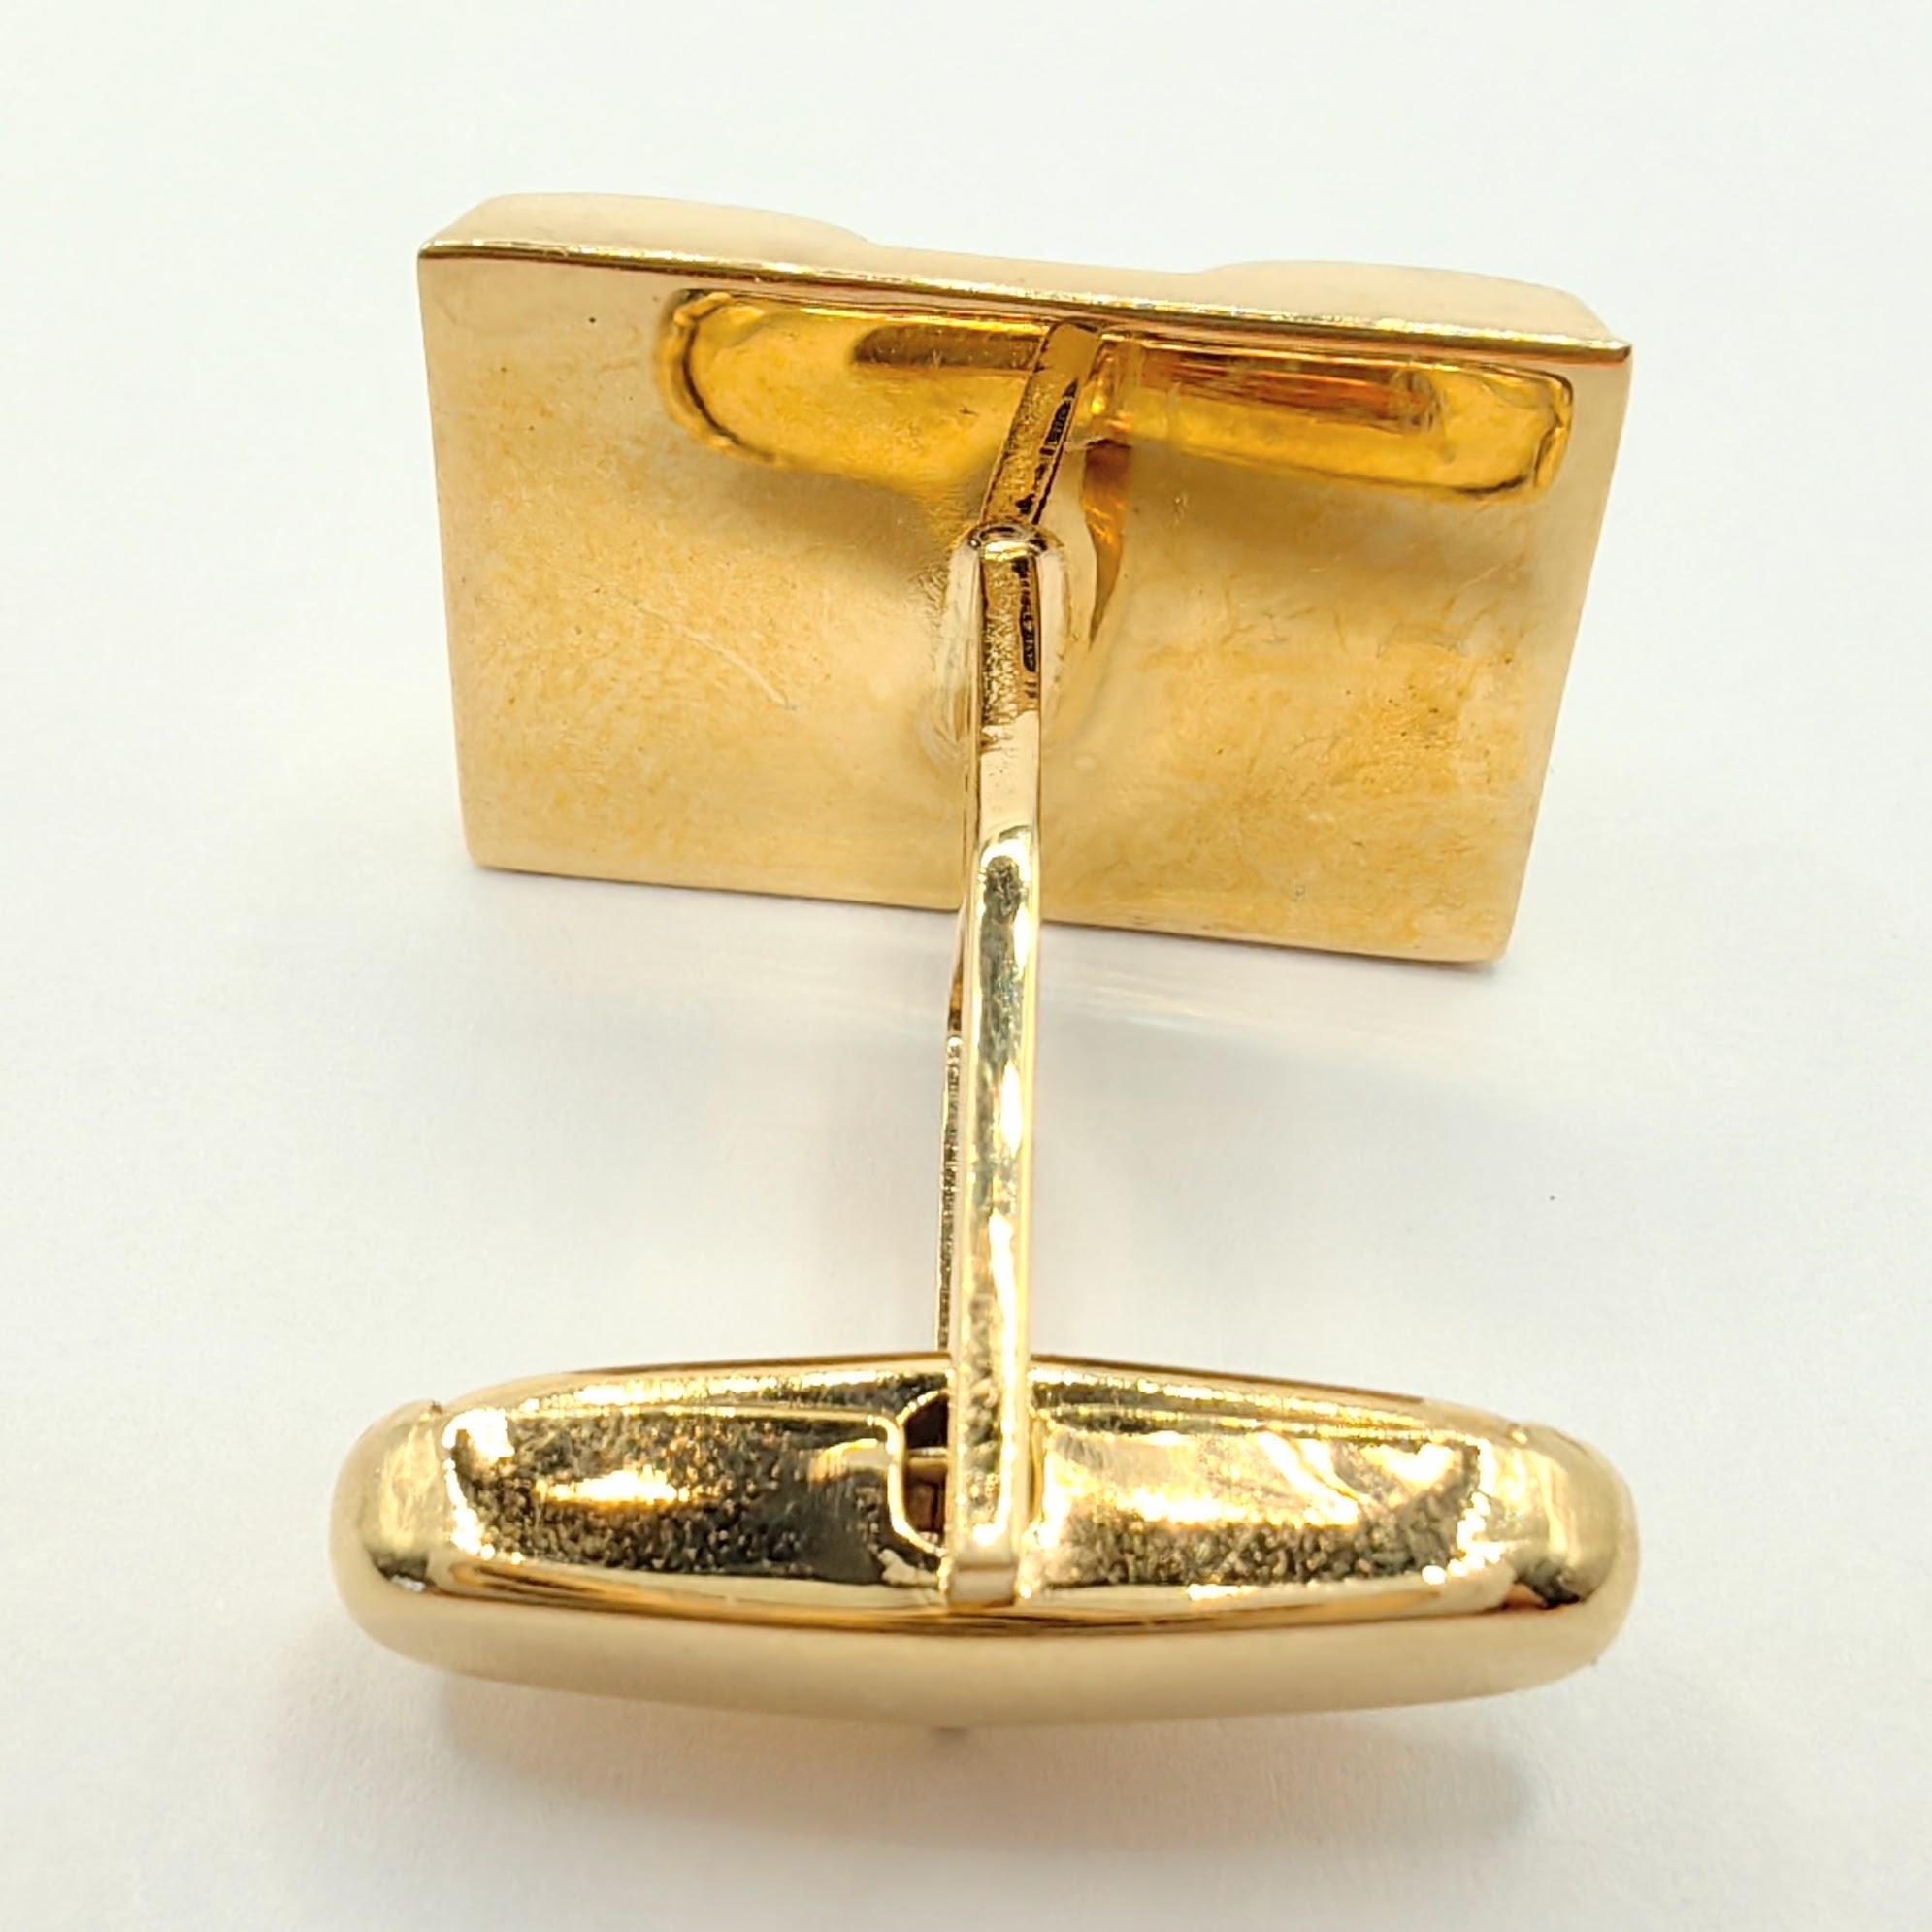 Vintage Geometric Design Cufflinks in 18K Yellow & White Two-tone Gold 1